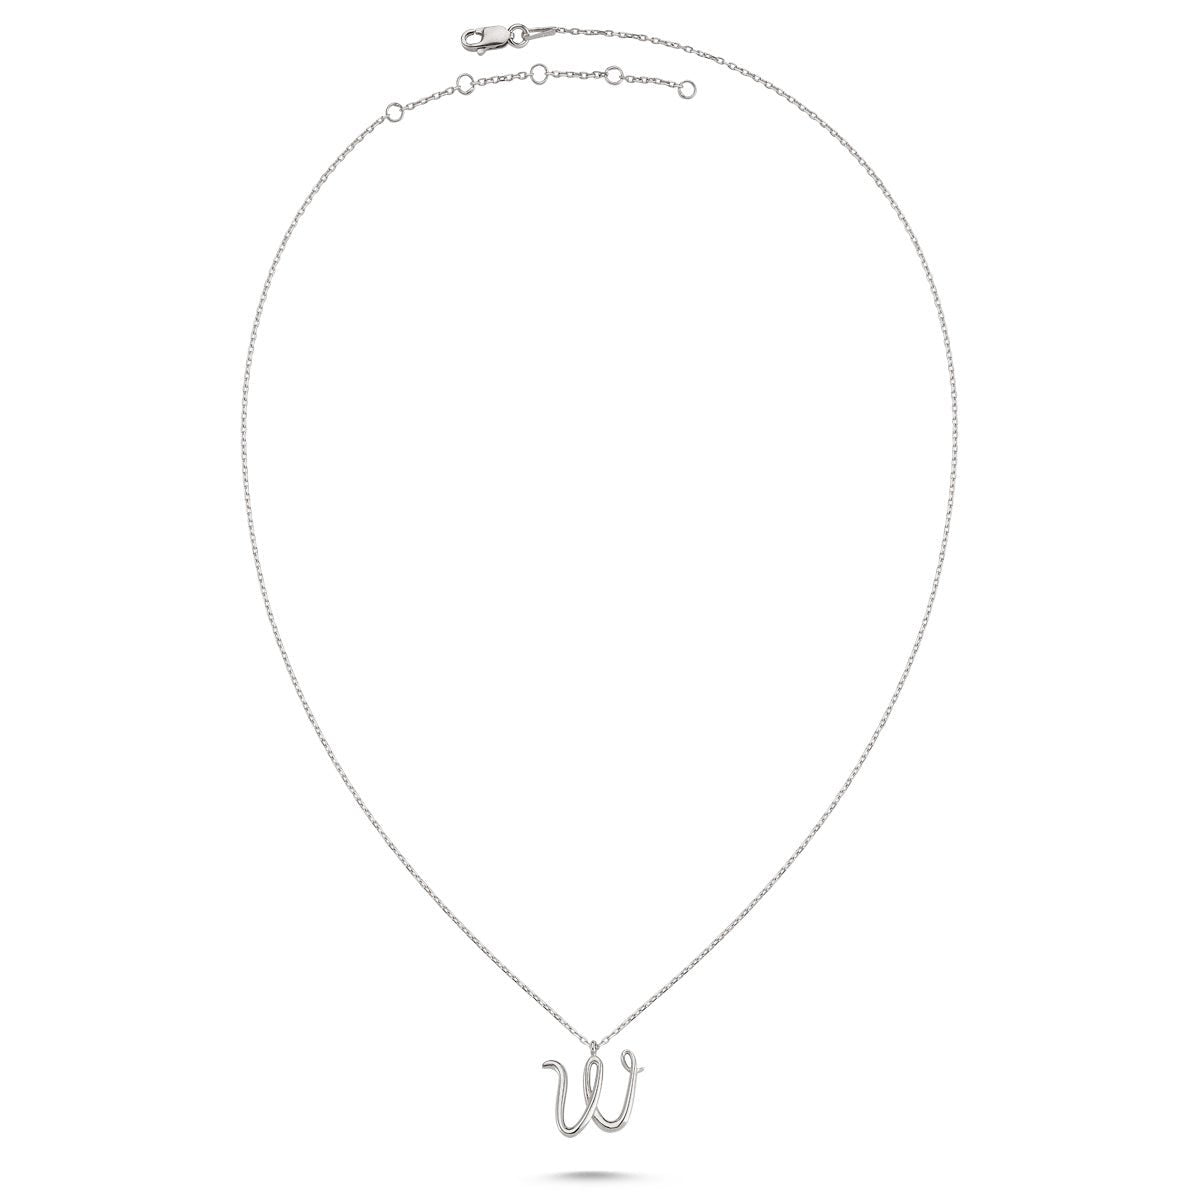 W Letter Mini Initial Silver Necklace - amoriumjewelry